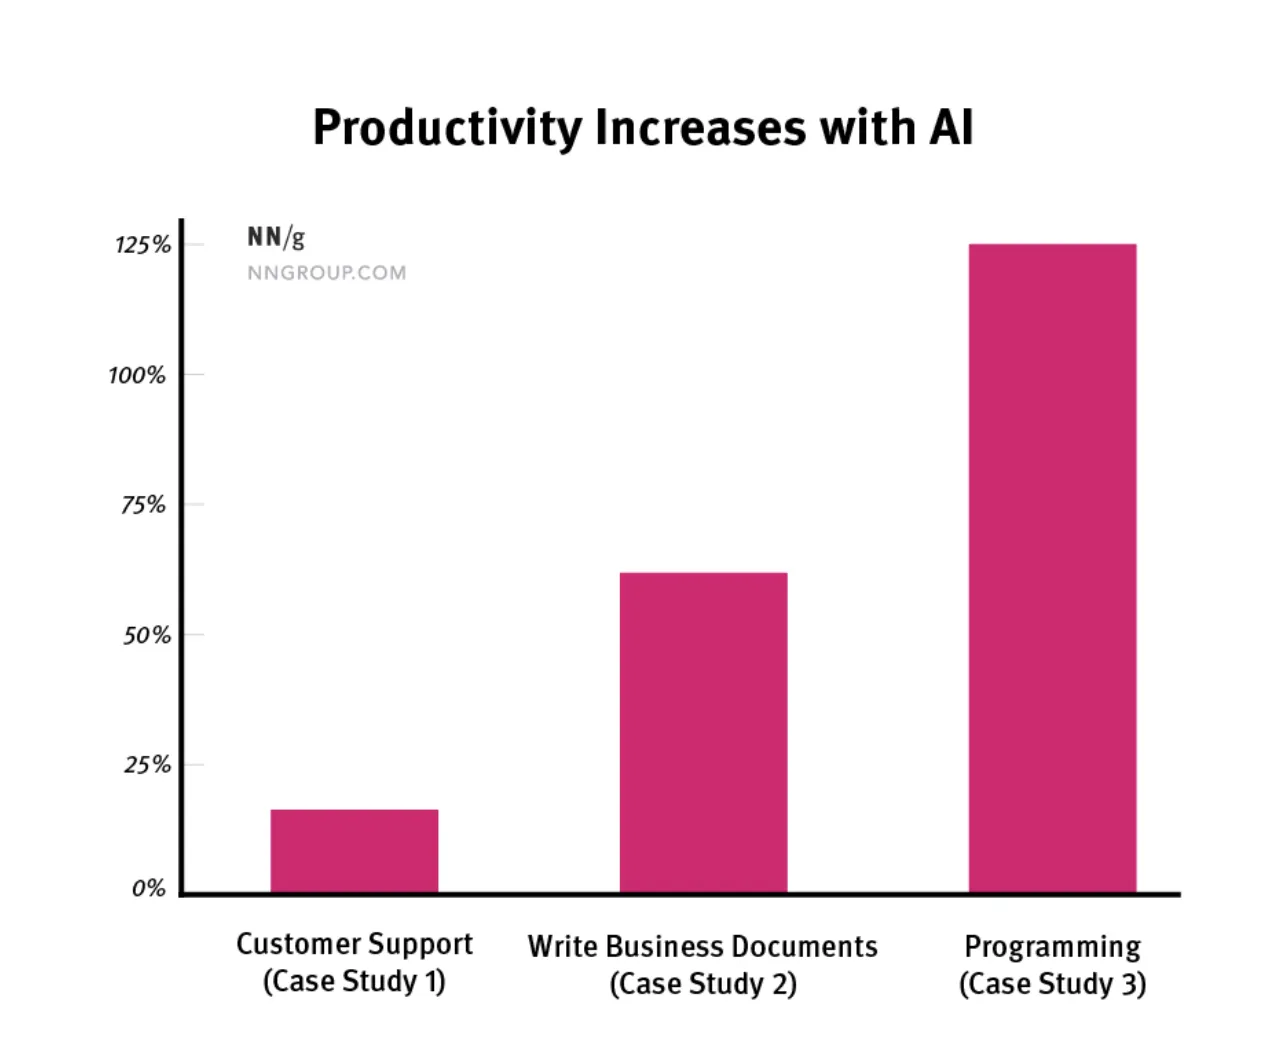 AI Improves Employee Productivity by 66%